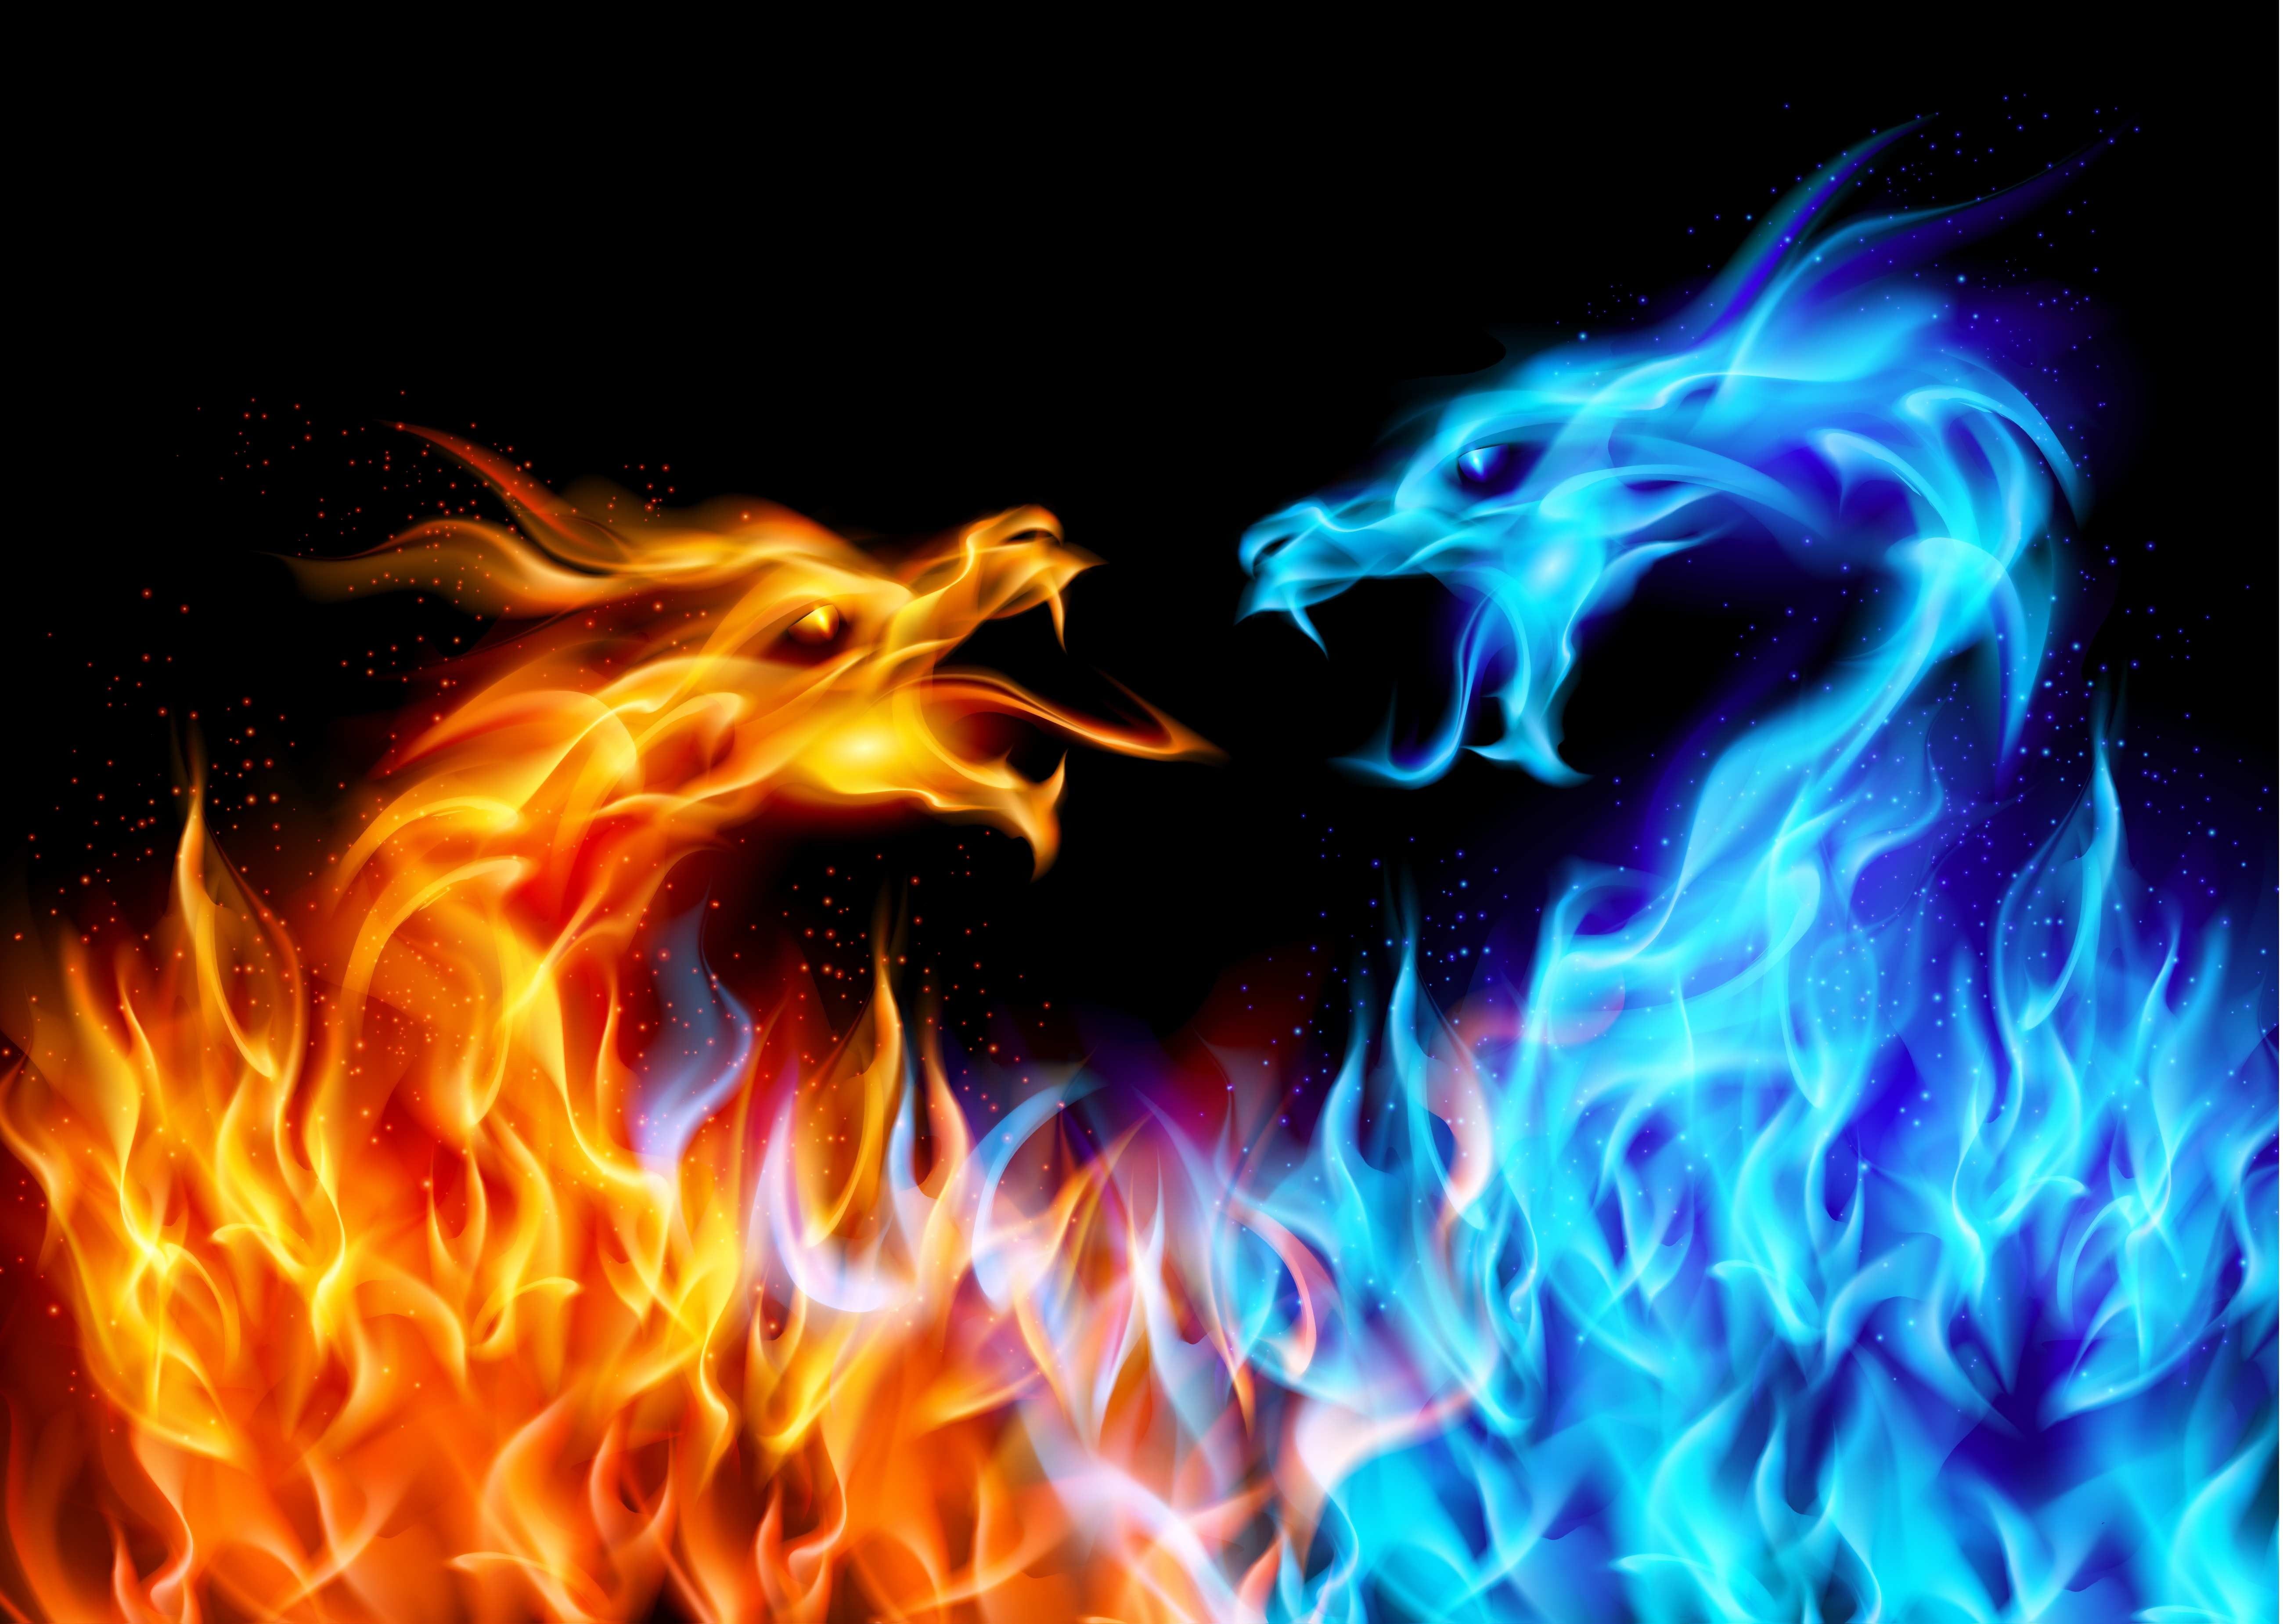 red and blue dragon fire digital wallpaper #dragon K #wallpaper #hdwallpaper #desktop. Dragon illustration, Fire dragon, Fire and ice dragons